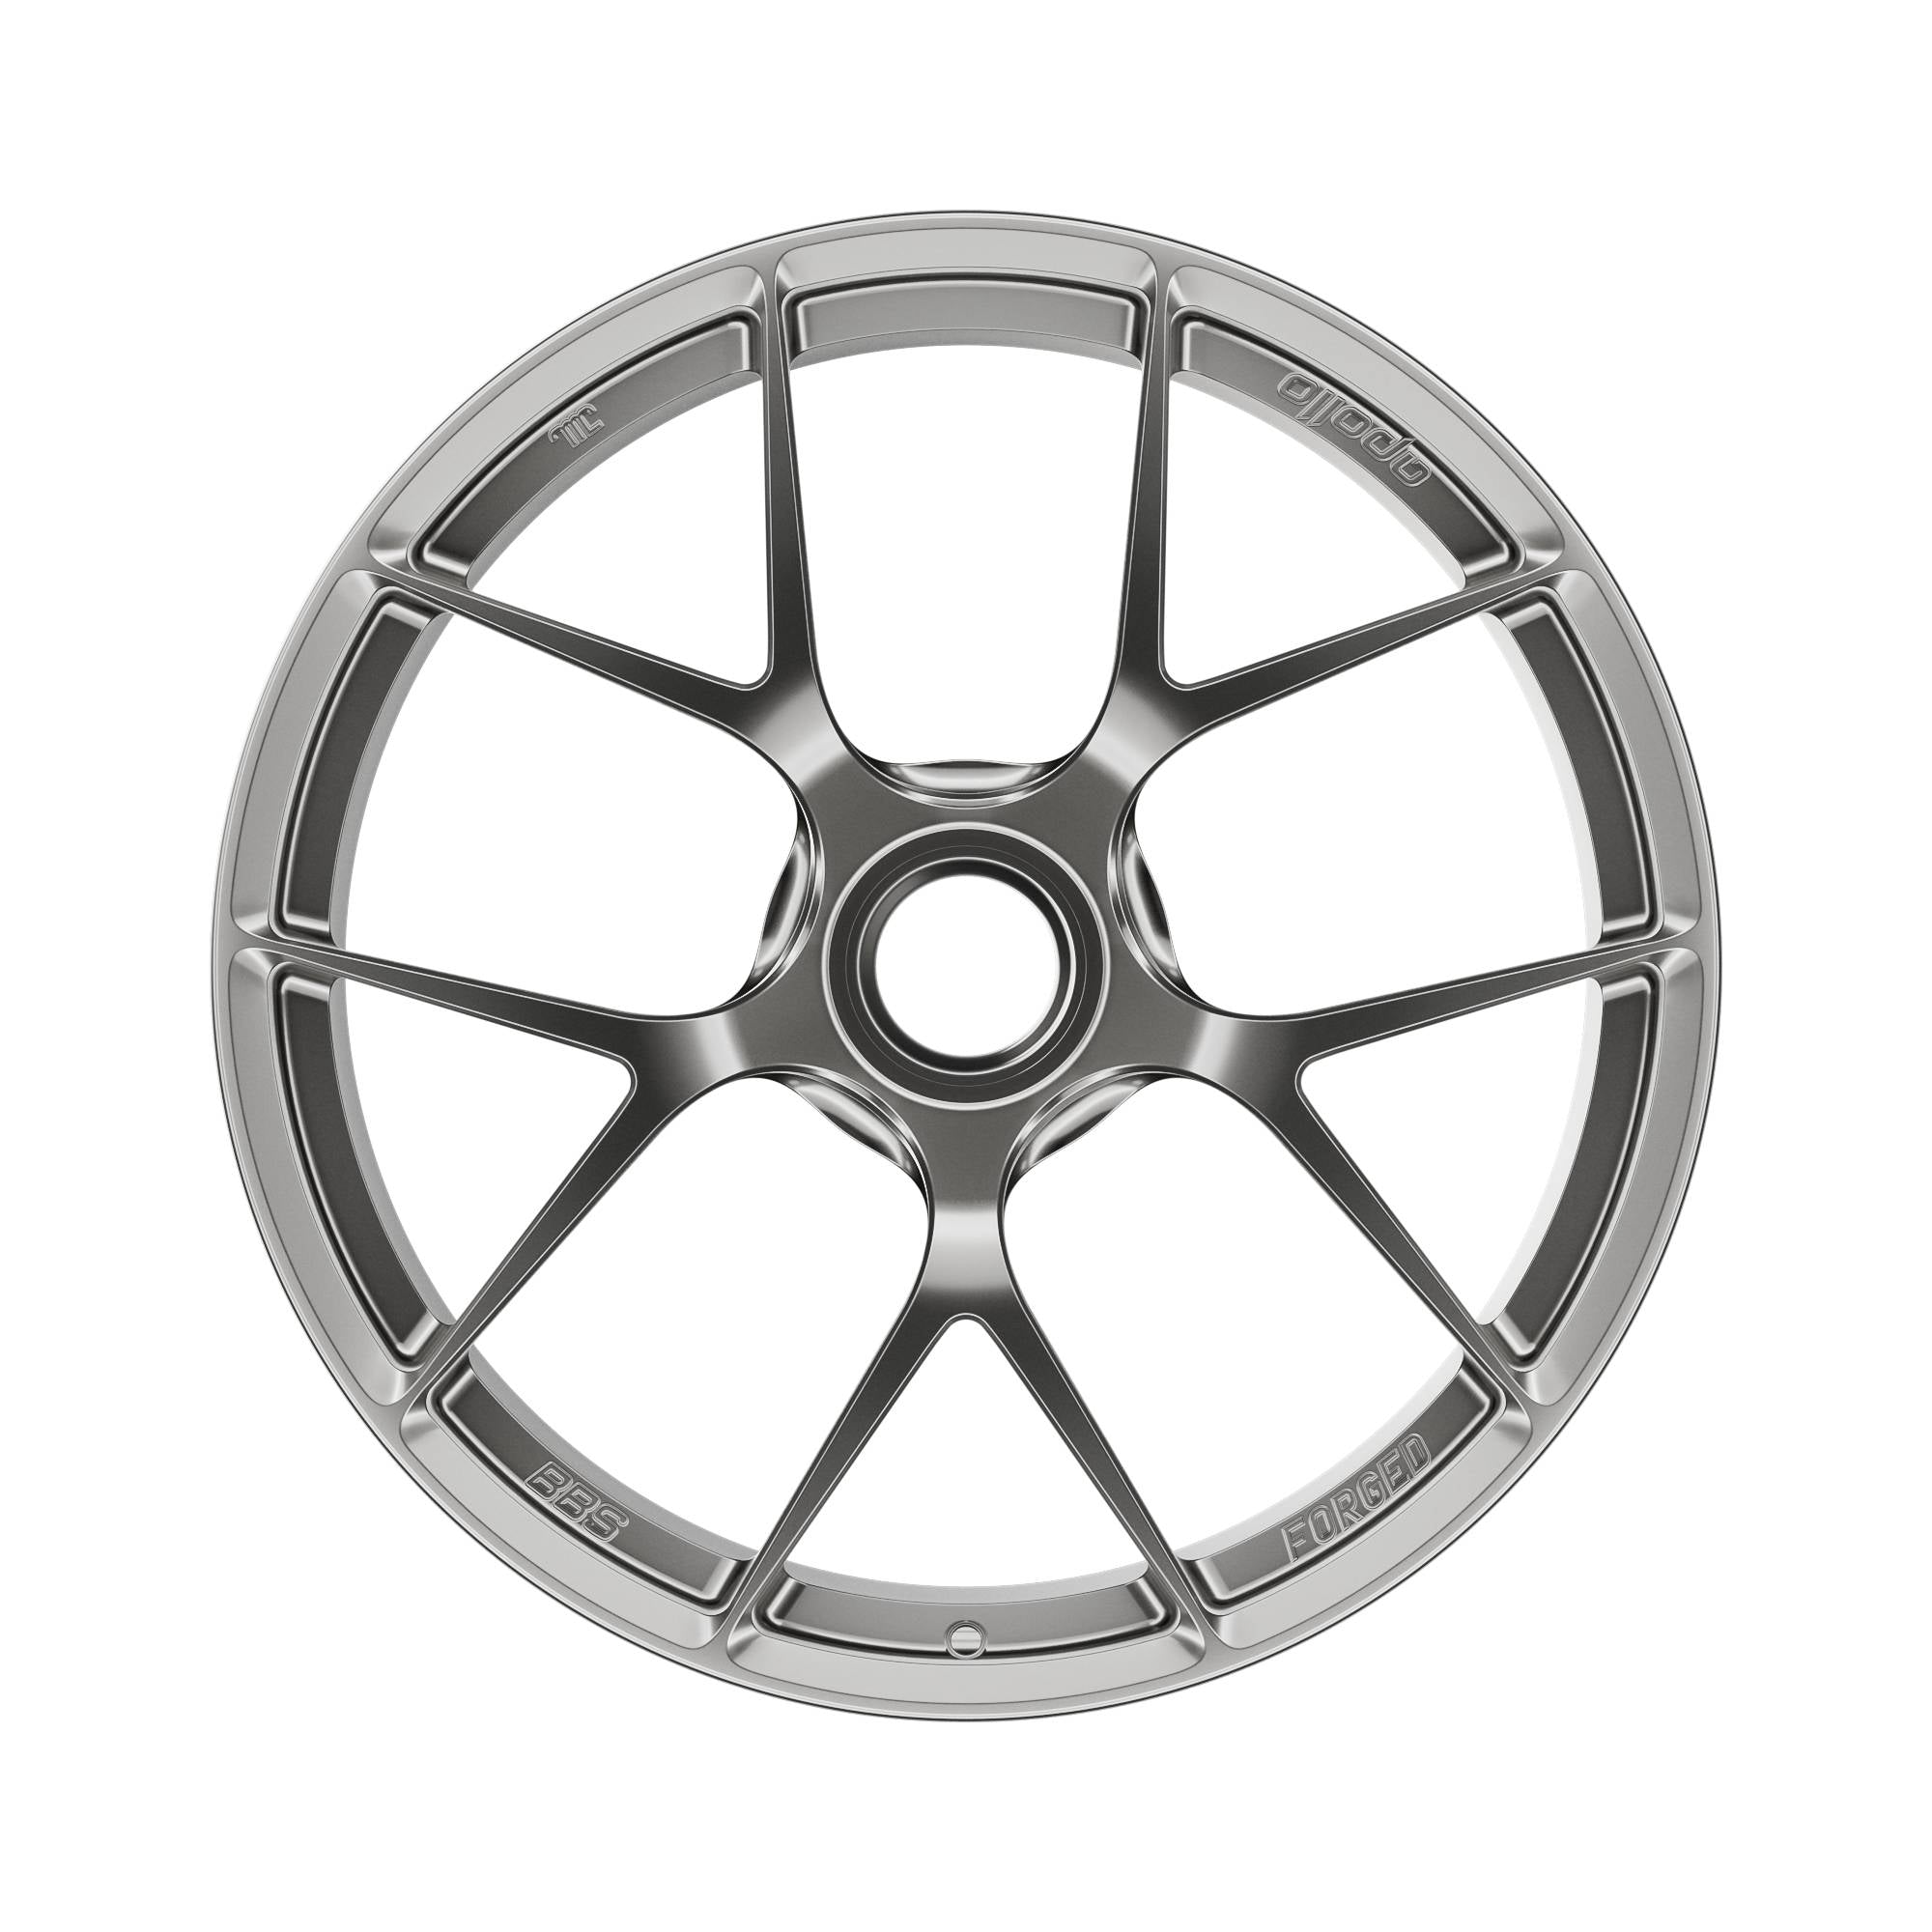 BBS Forged Exclusive FI-R Platinum Silver